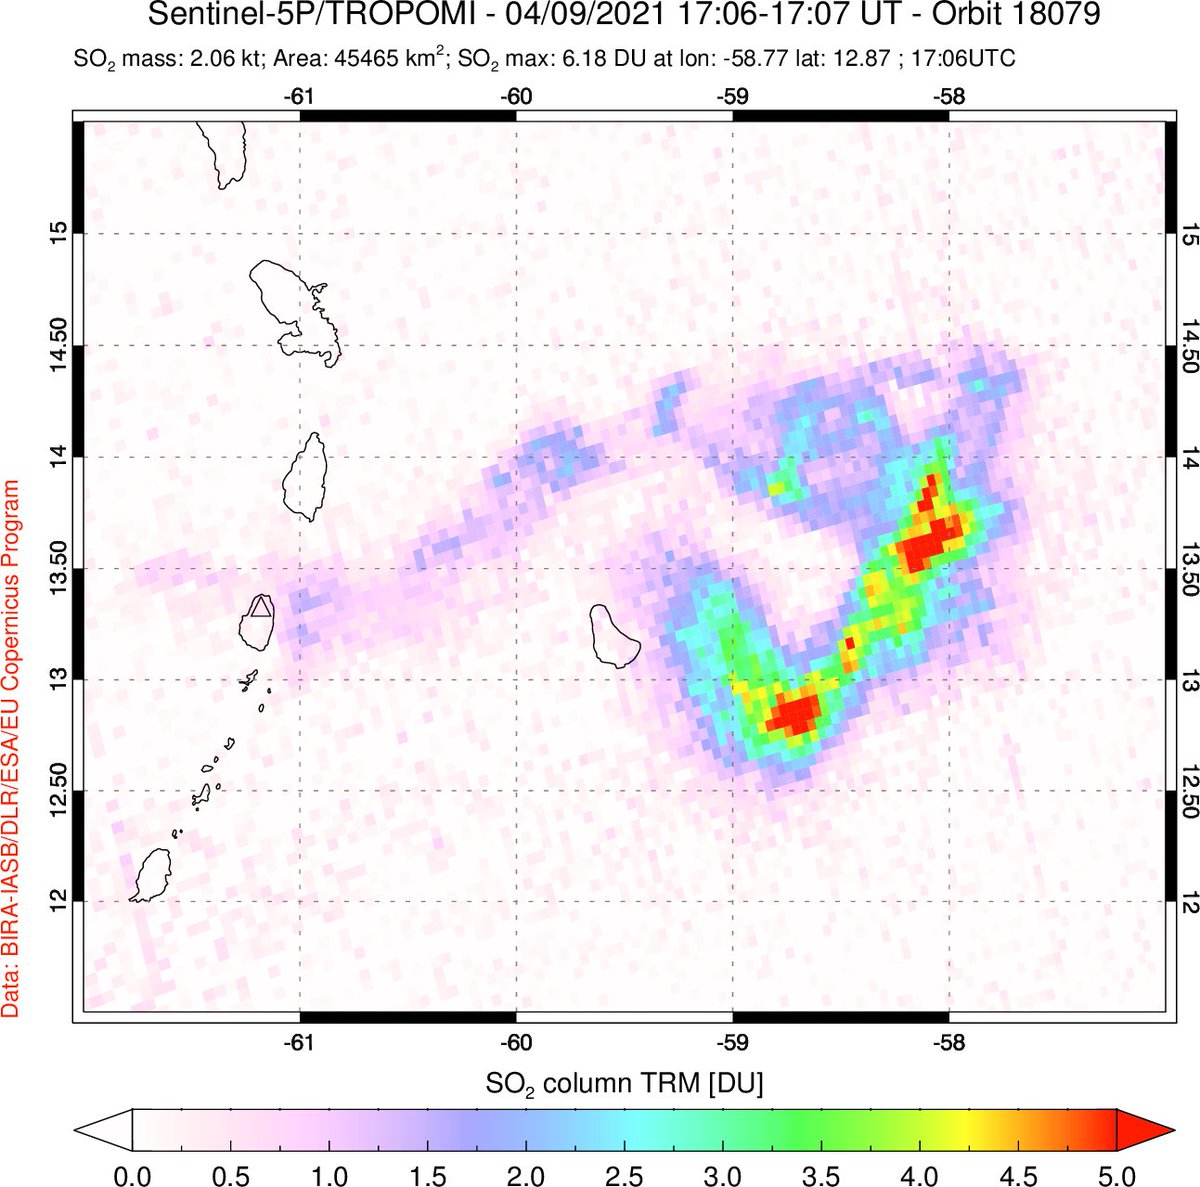 First look at  #Sentinel5P  #Tropomi SO₂ data for the April 9  #LaSoufrière  #eruption. Relatively small amount of SO₂ detected (~2 kilotons) heading east over the  #Atlantic; similar to the April 1979 eruption.  @CopernicusEU  @jvernier82  @soufriere_hills  #LaSoufriereEruption